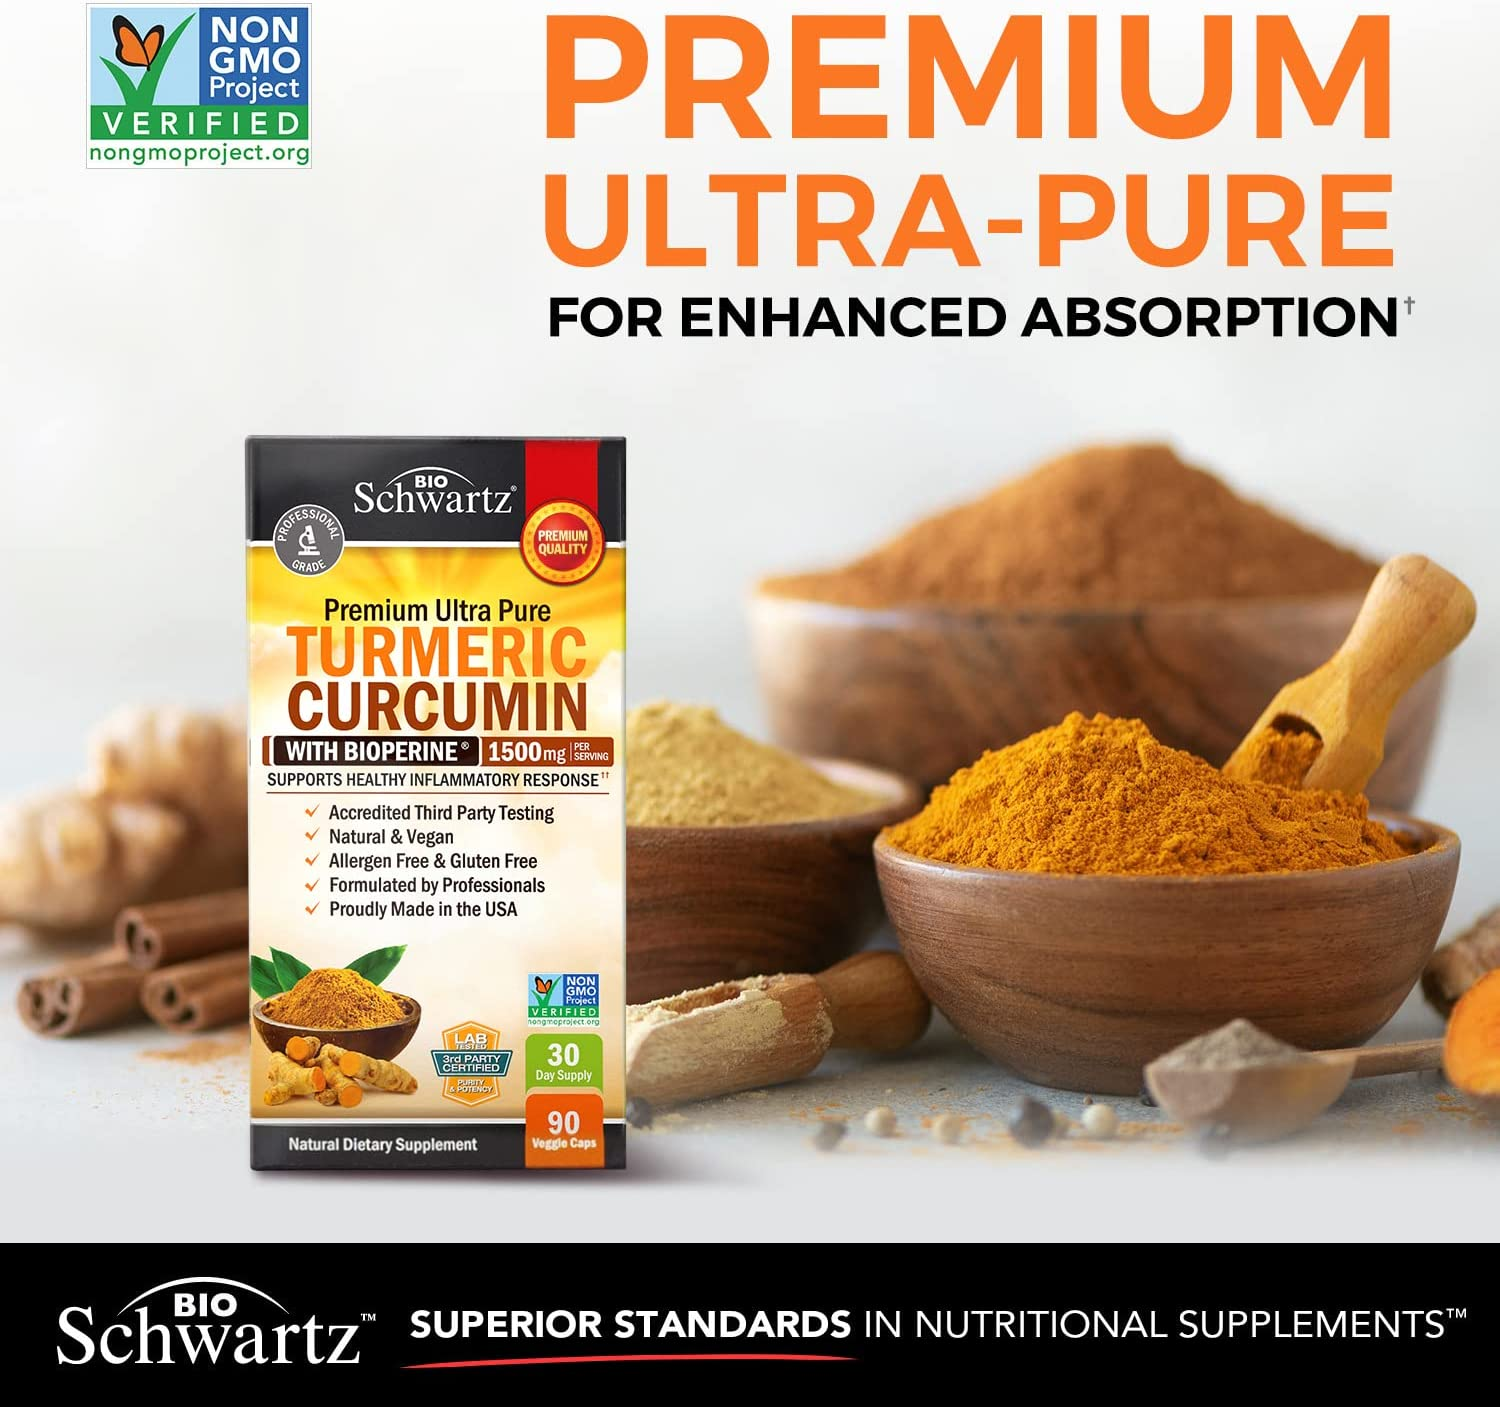 Turmeric Curcumin with Bioperine 1500Mg - Natural Joint & Healthy Inflammatory Support with 95% Standardized Curcuminoids for Potency & Absorption - Non-Gmo, Gluten Free Capsules with Black Pepper.